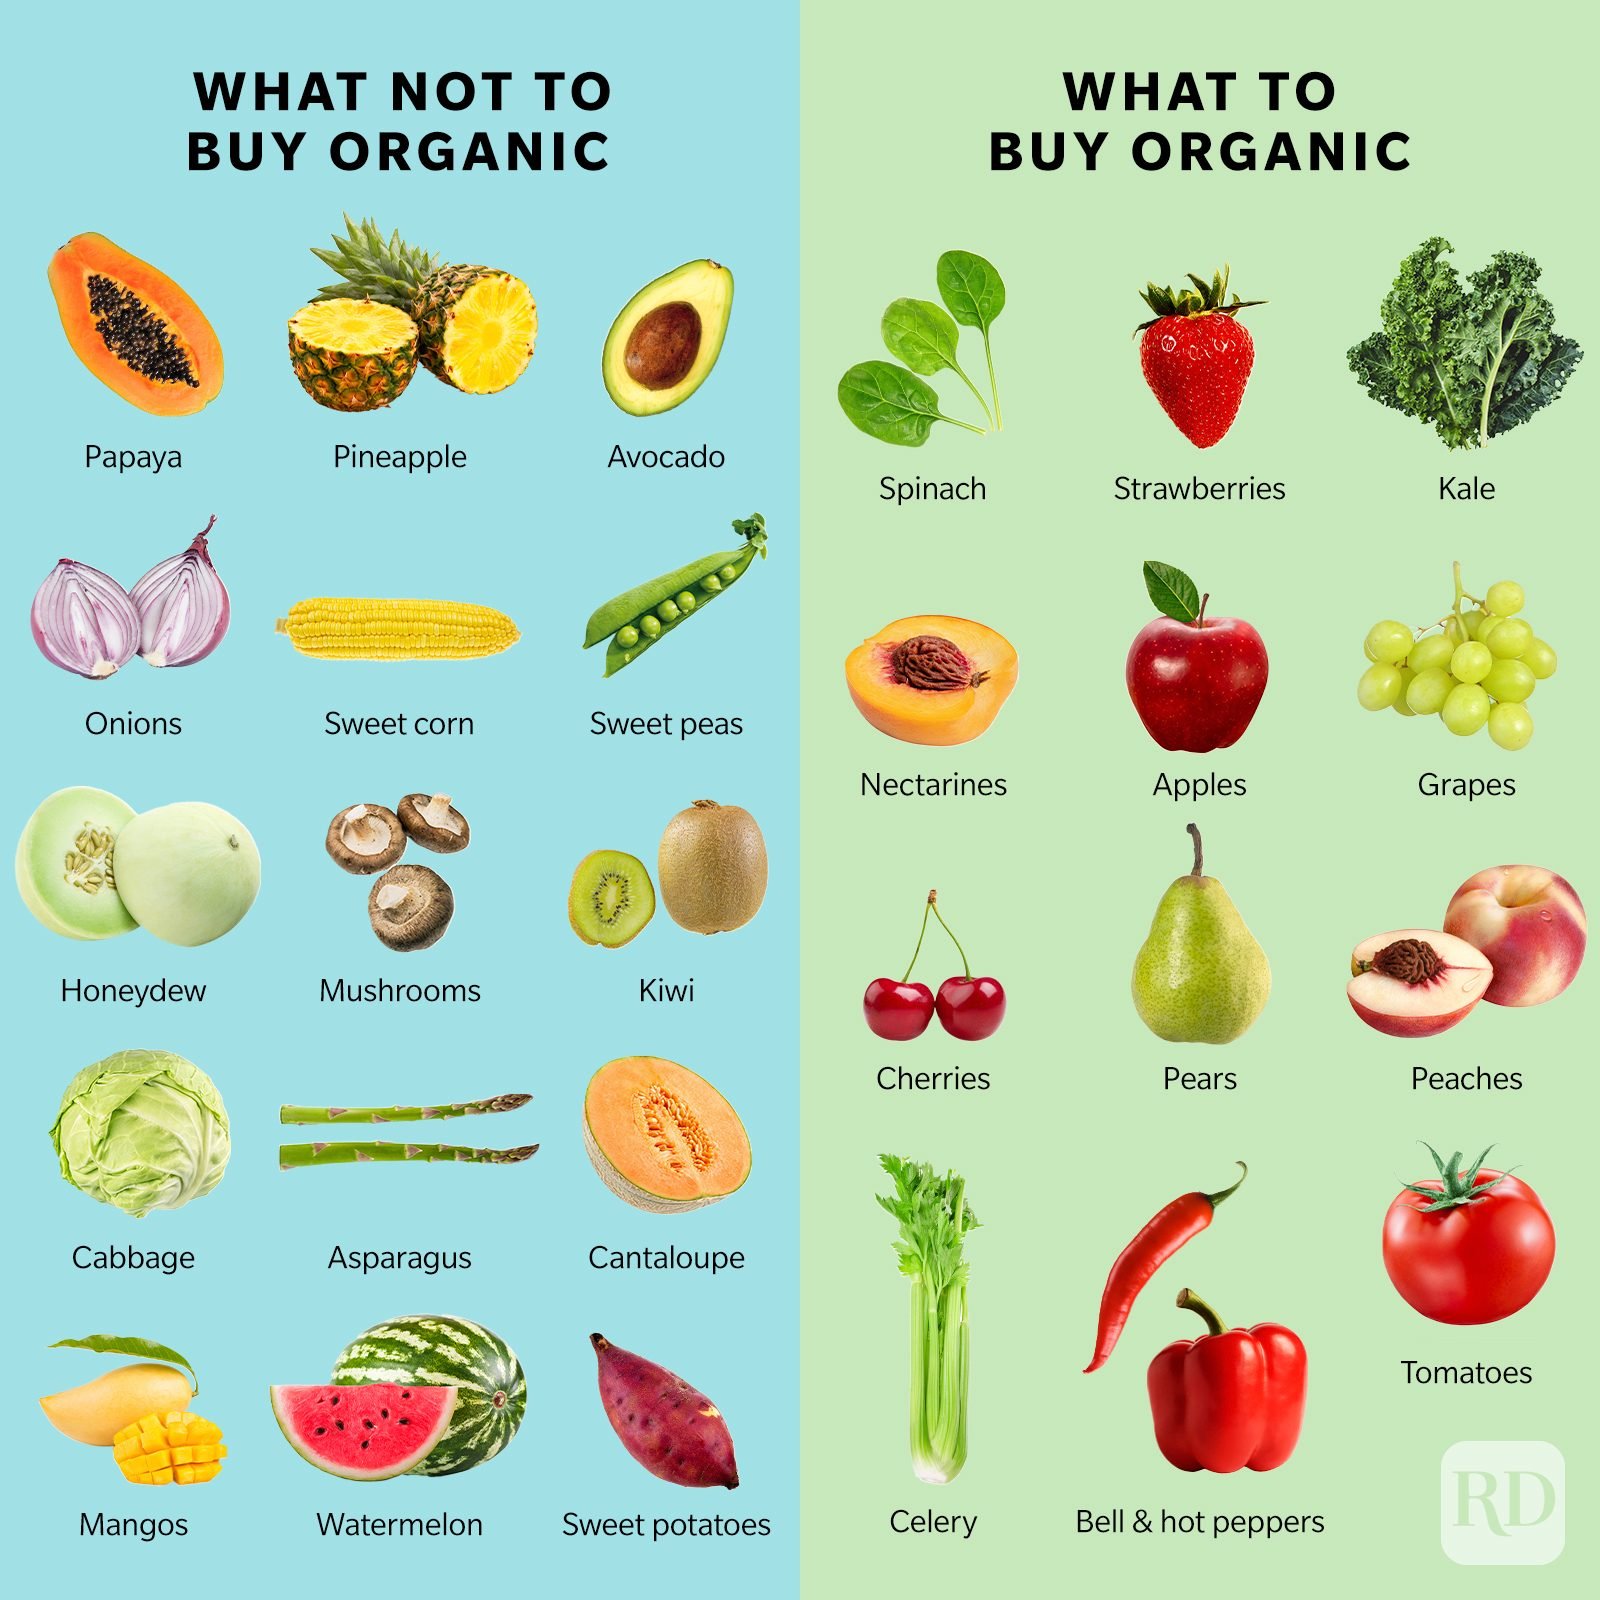 What to and not to buy organic